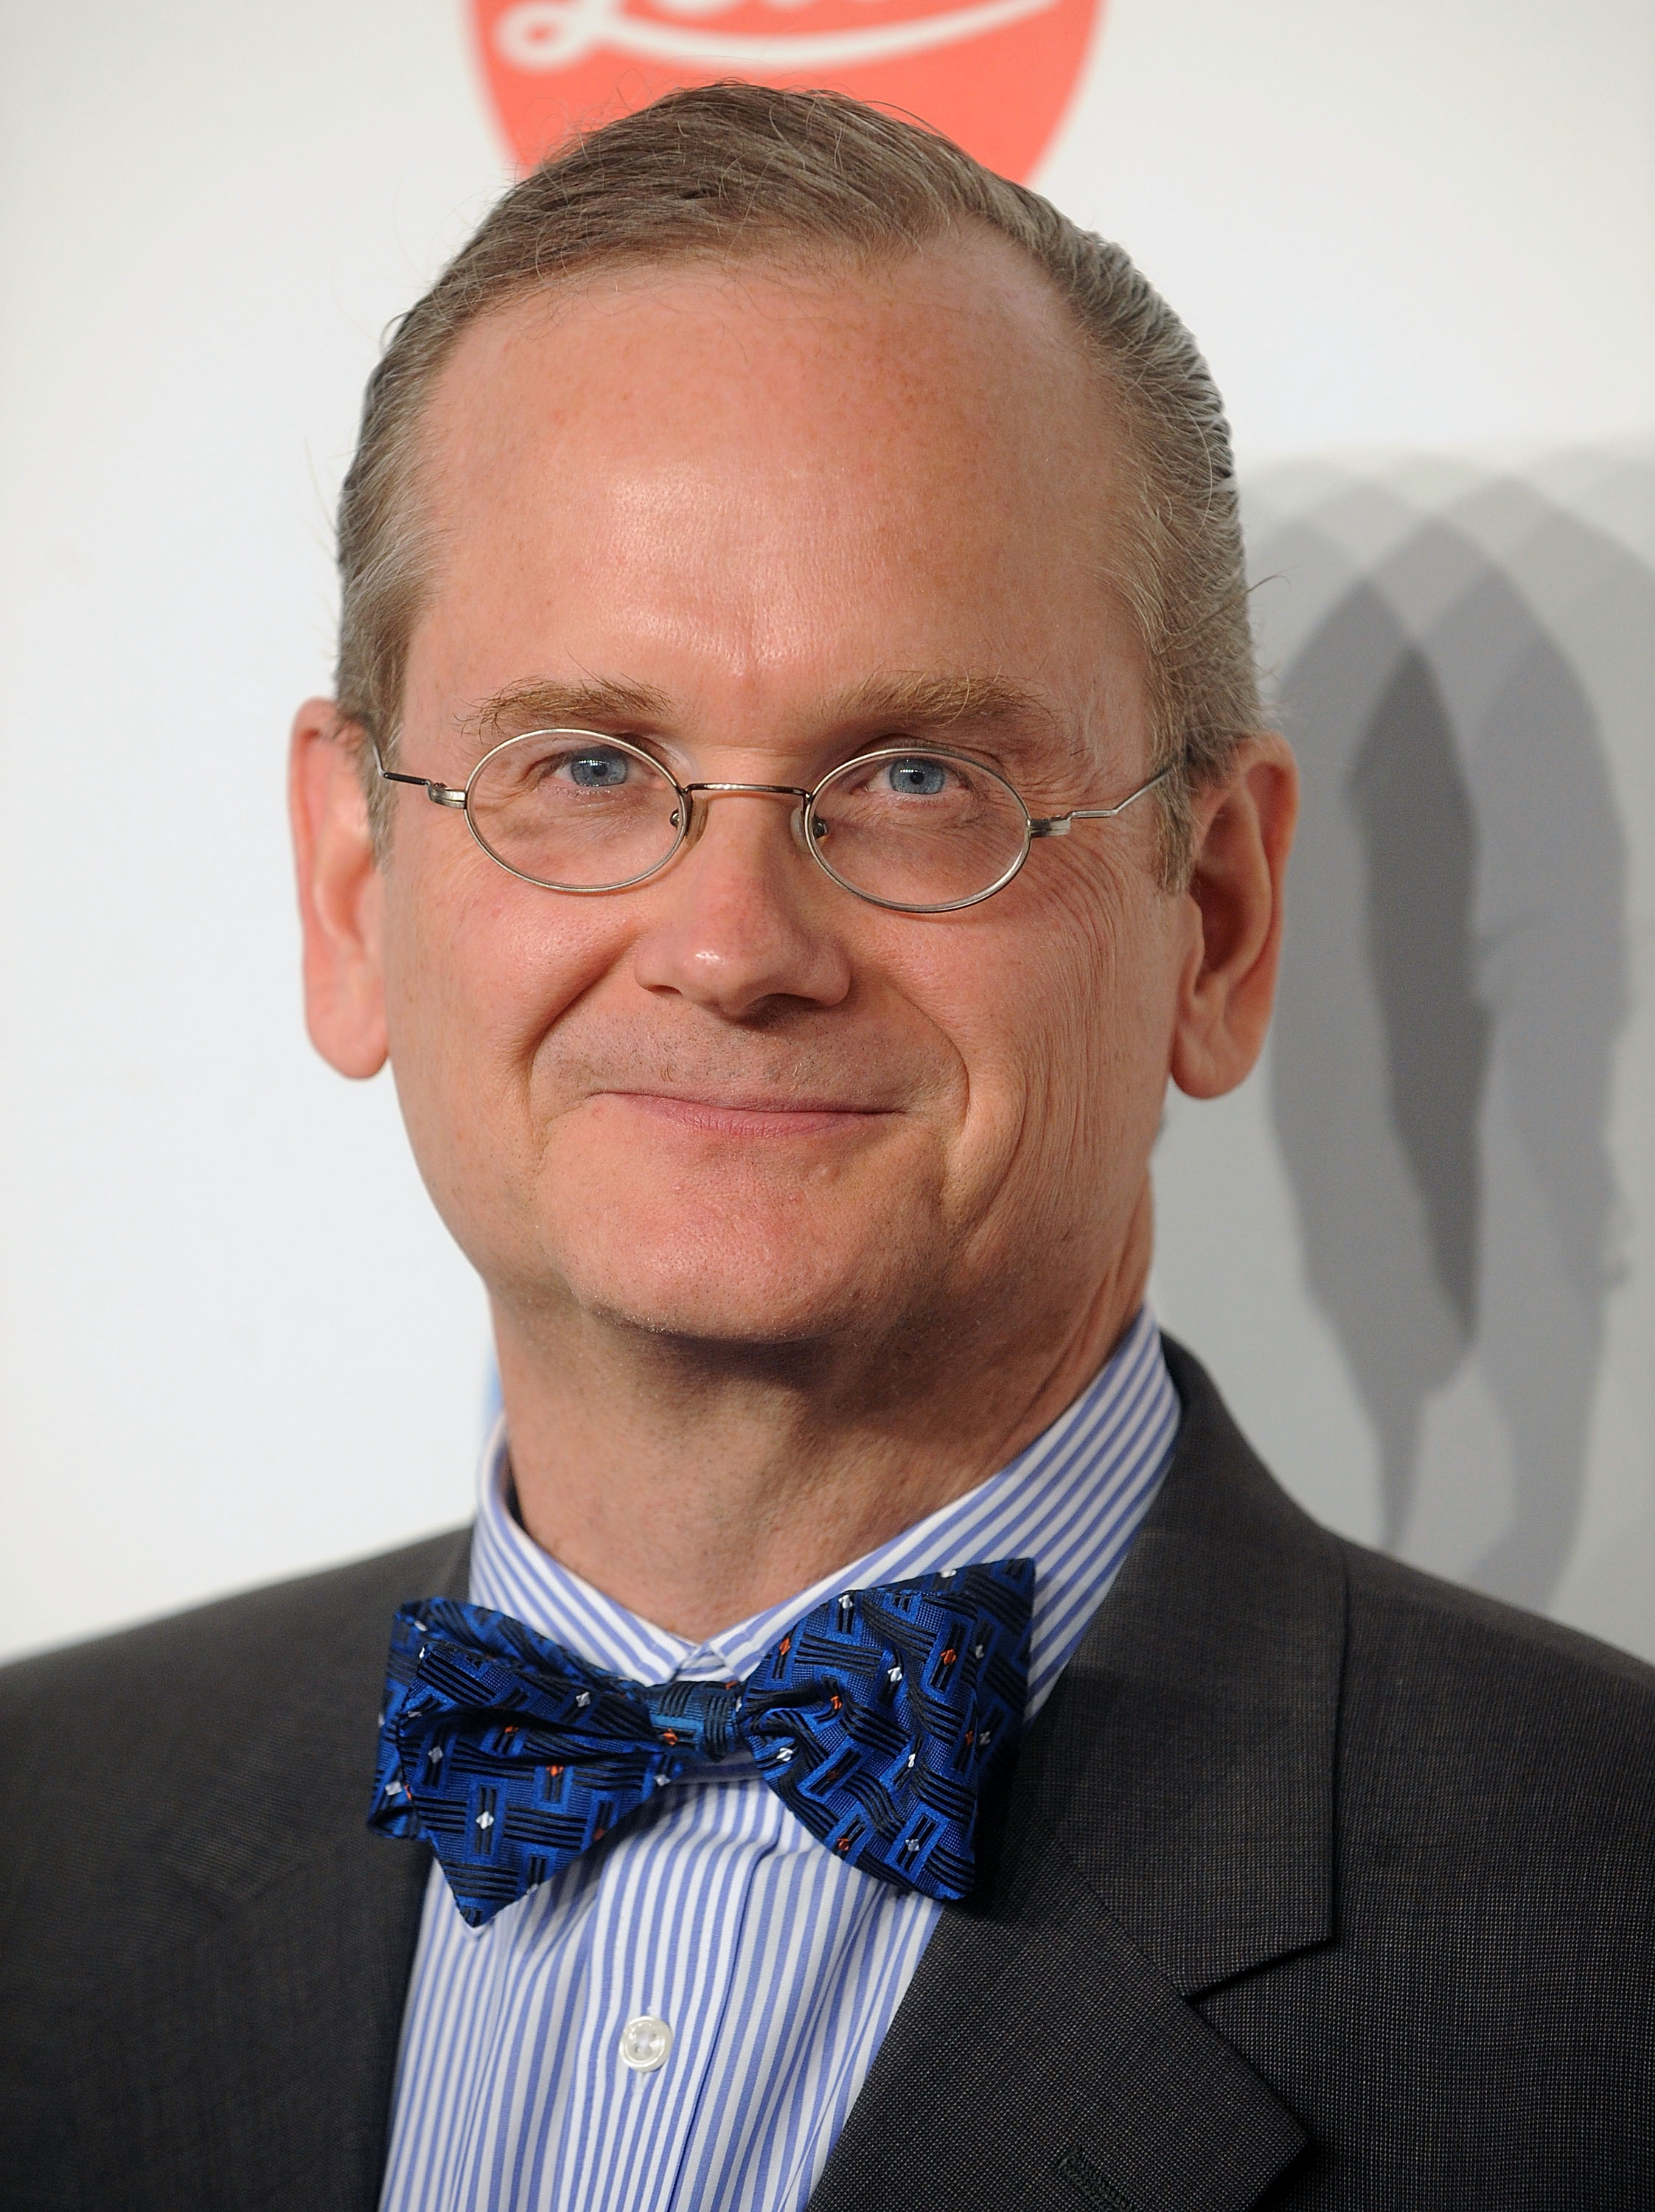 Lawrence Lessig attends 18th Annual Webby Awards on May 19, 2014 in New York, United States. (Brad Barket—Getty Images)